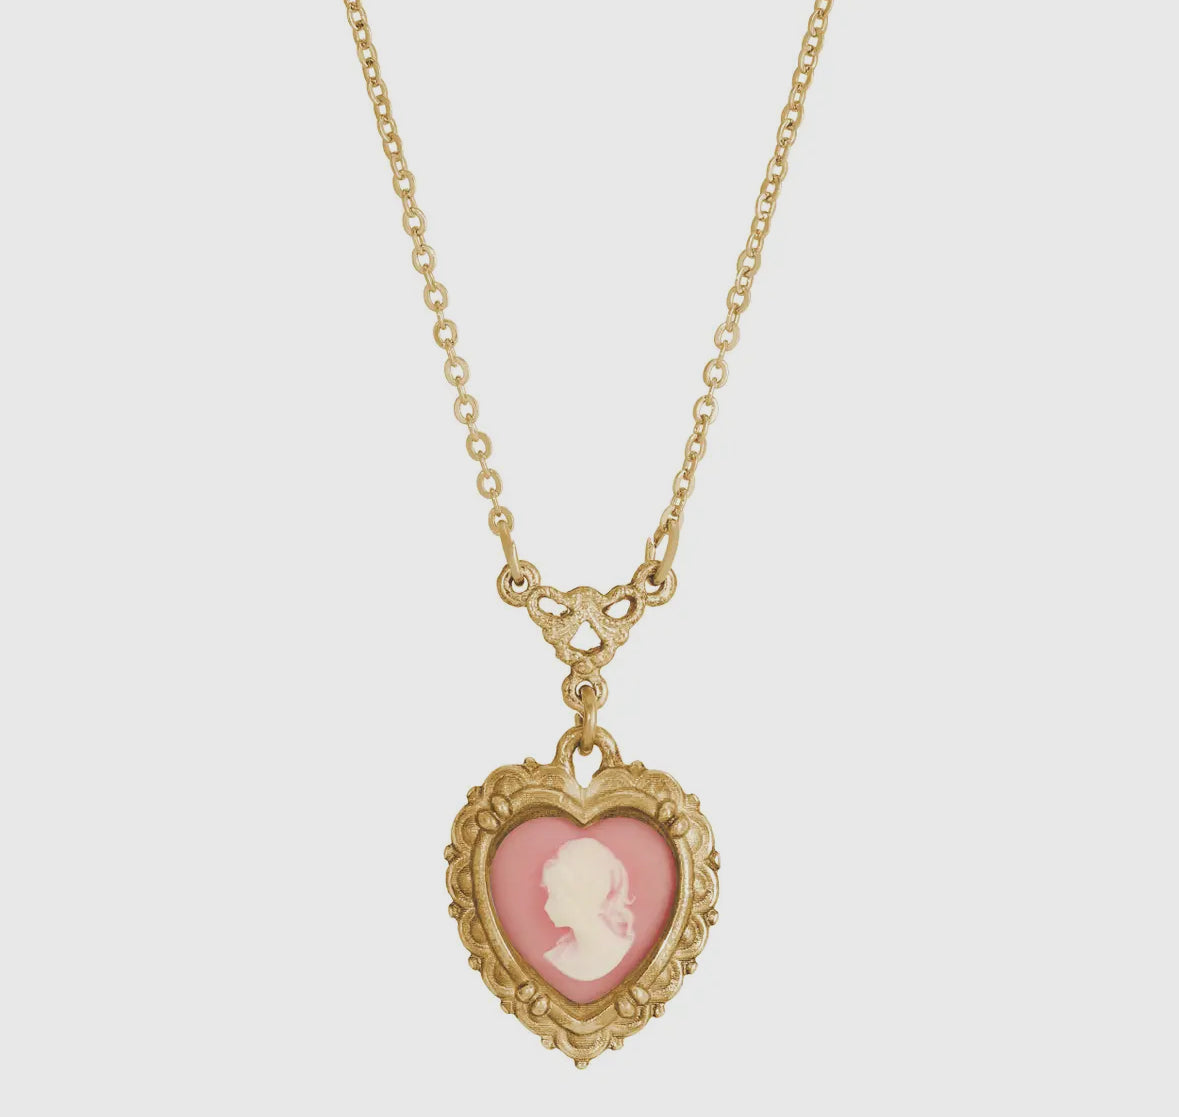 Gold Heart Cameo Pendant Necklace